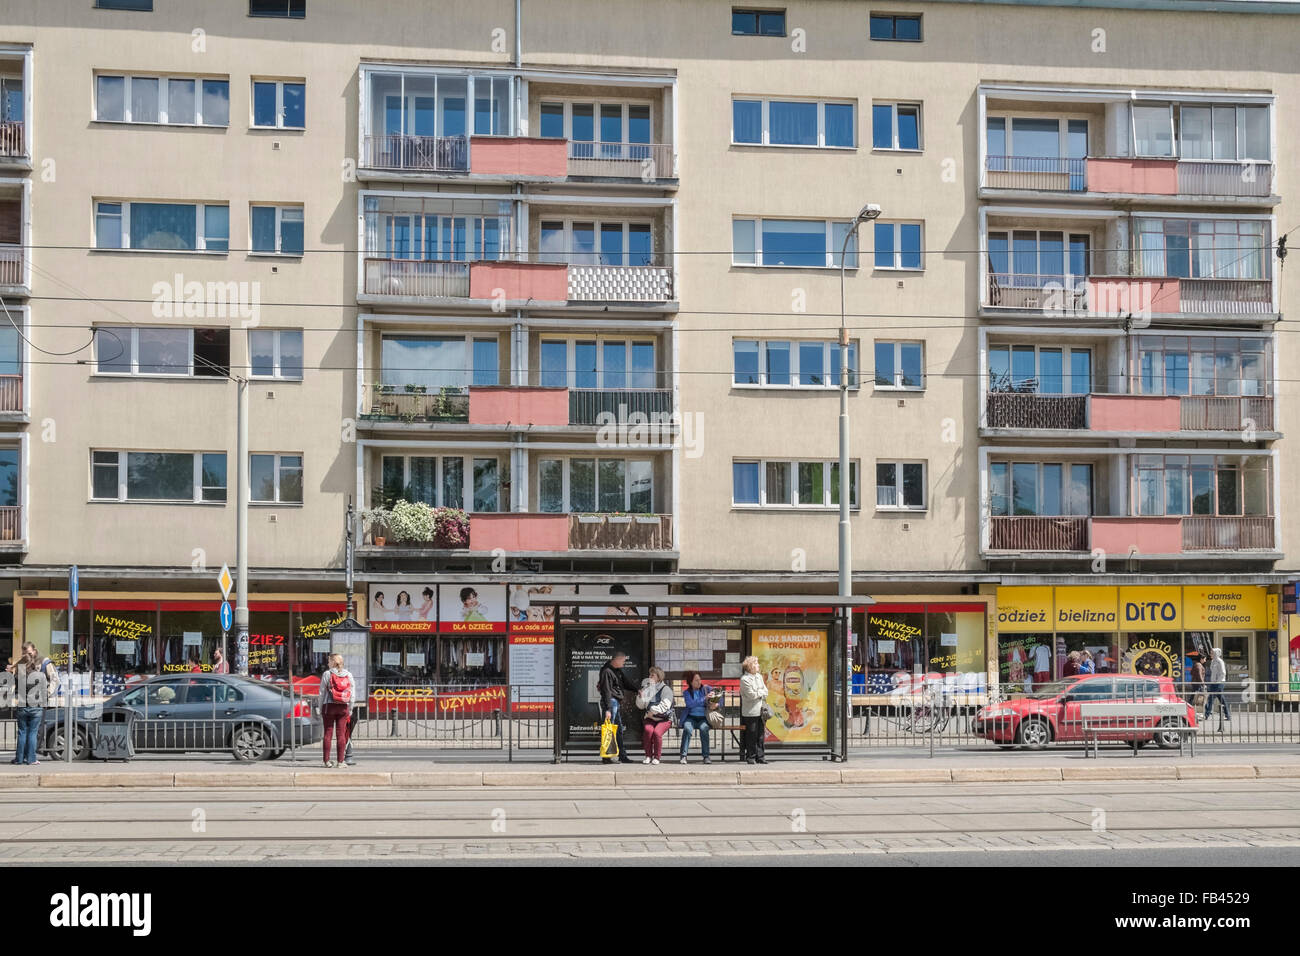 Polish Shops High Resolution Stock Photography and Images - Alamy